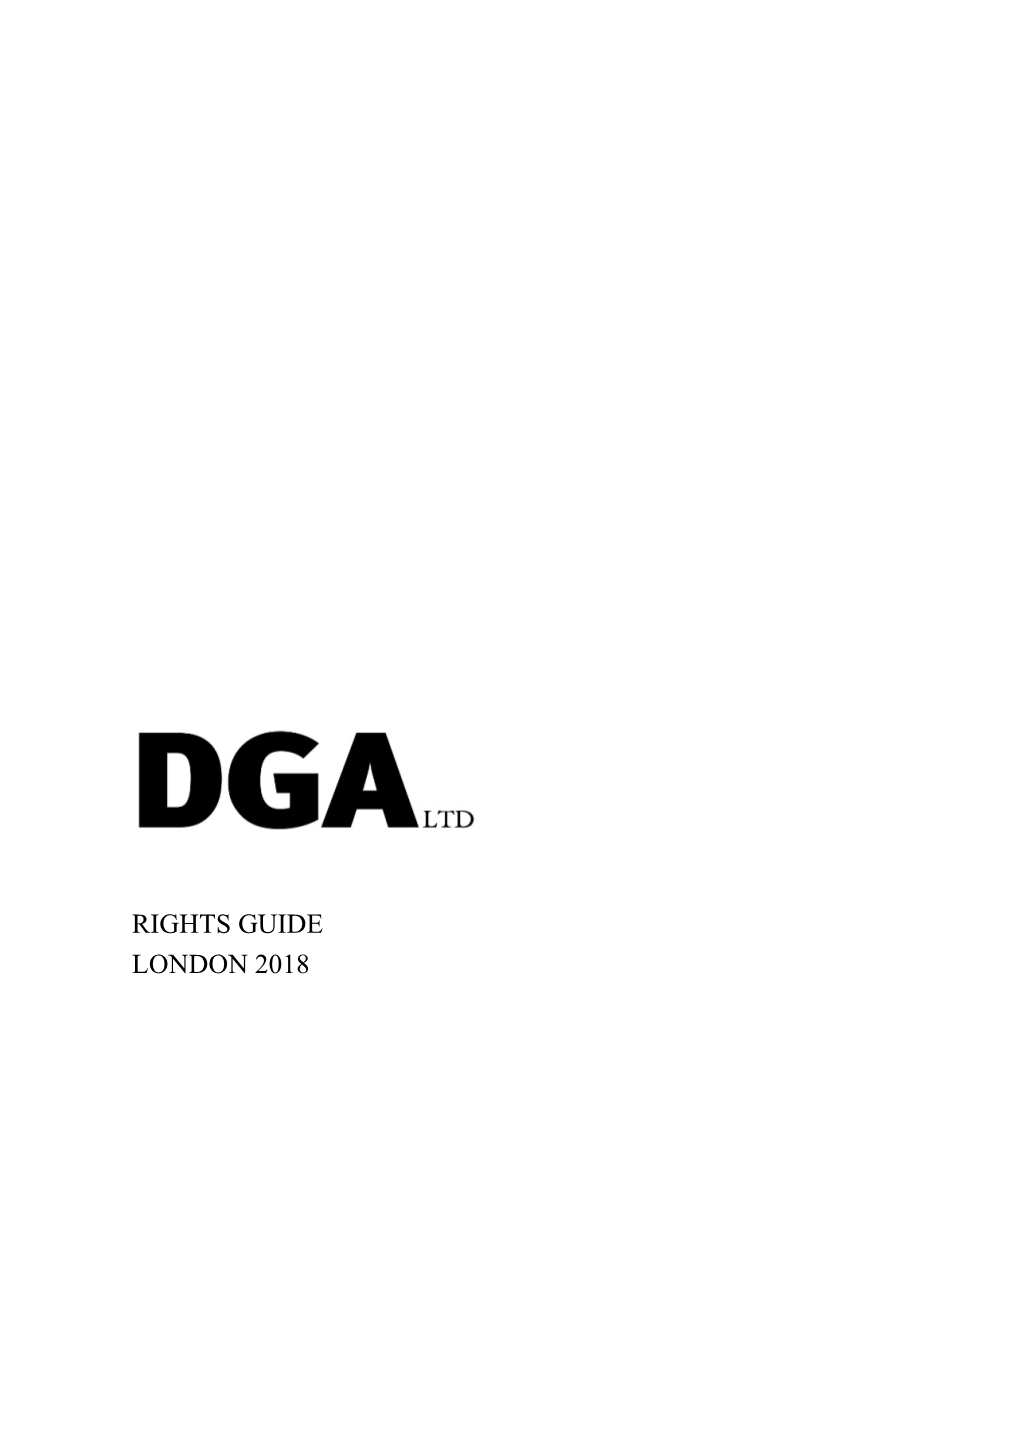 Rights Guide London 2018